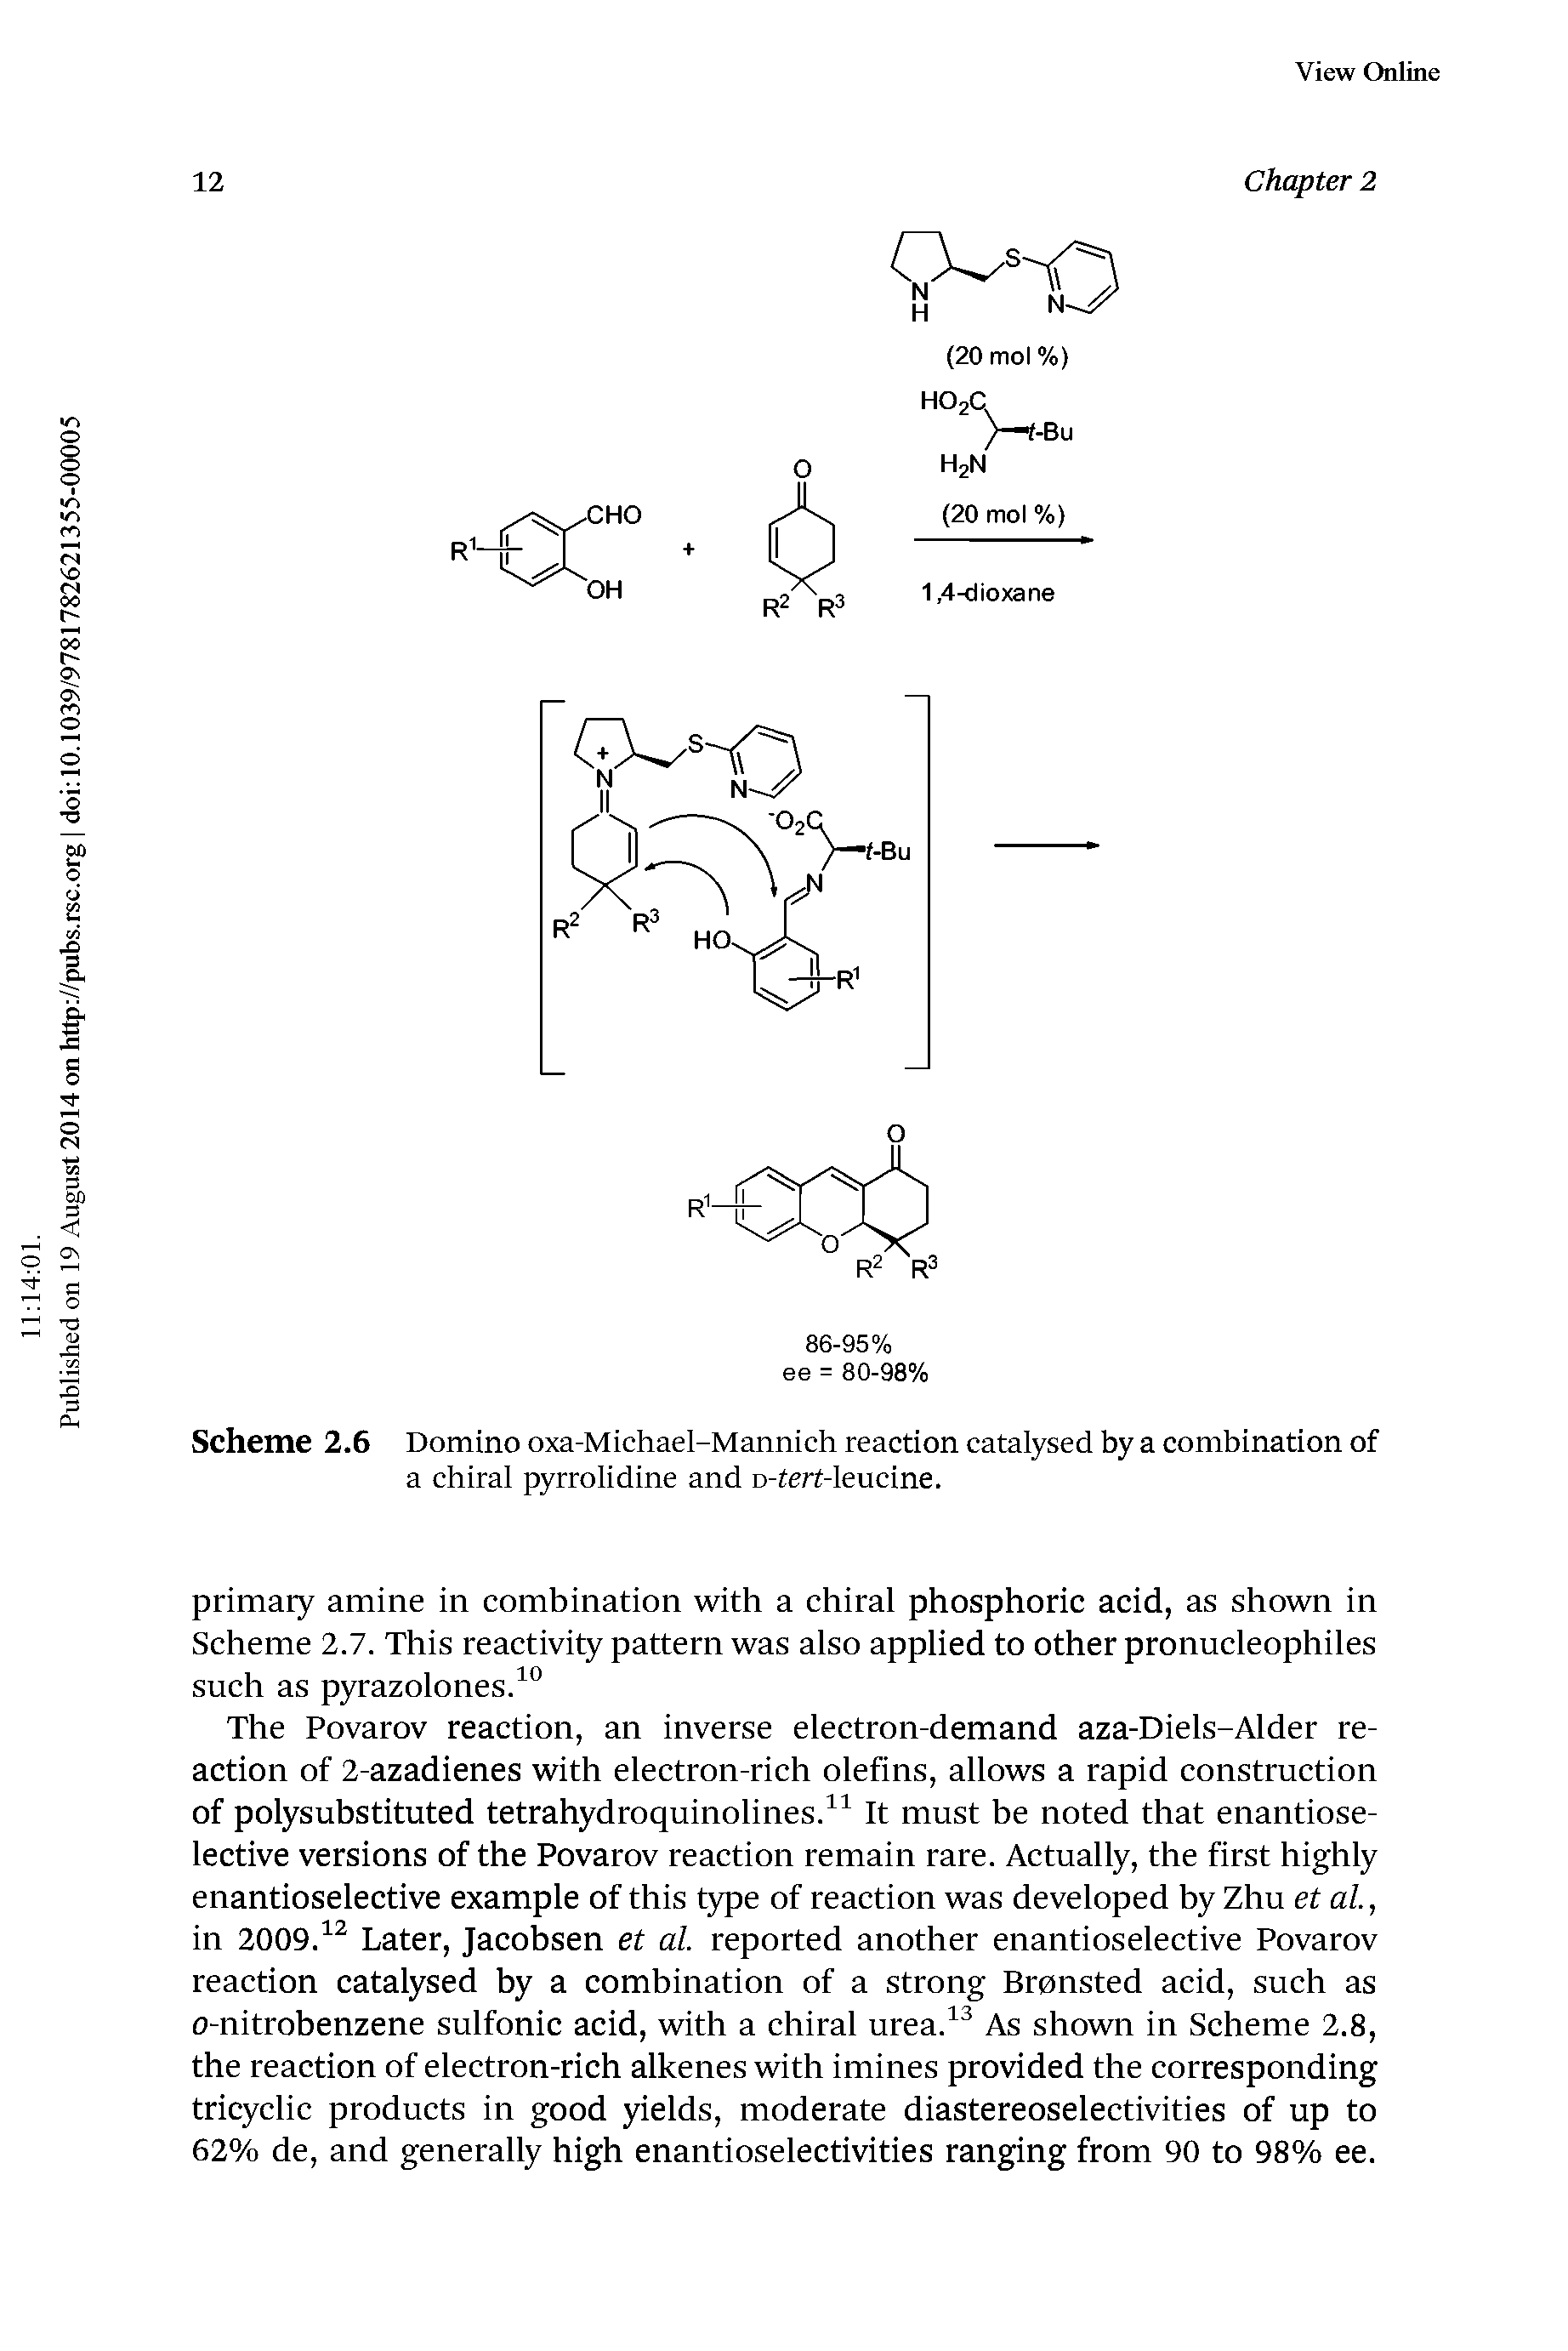 Scheme 2.6 Domino oxa-Michael-Mannich reaction catalysed by a combination of a chiral pyrrolidine and n-tert-leucine.